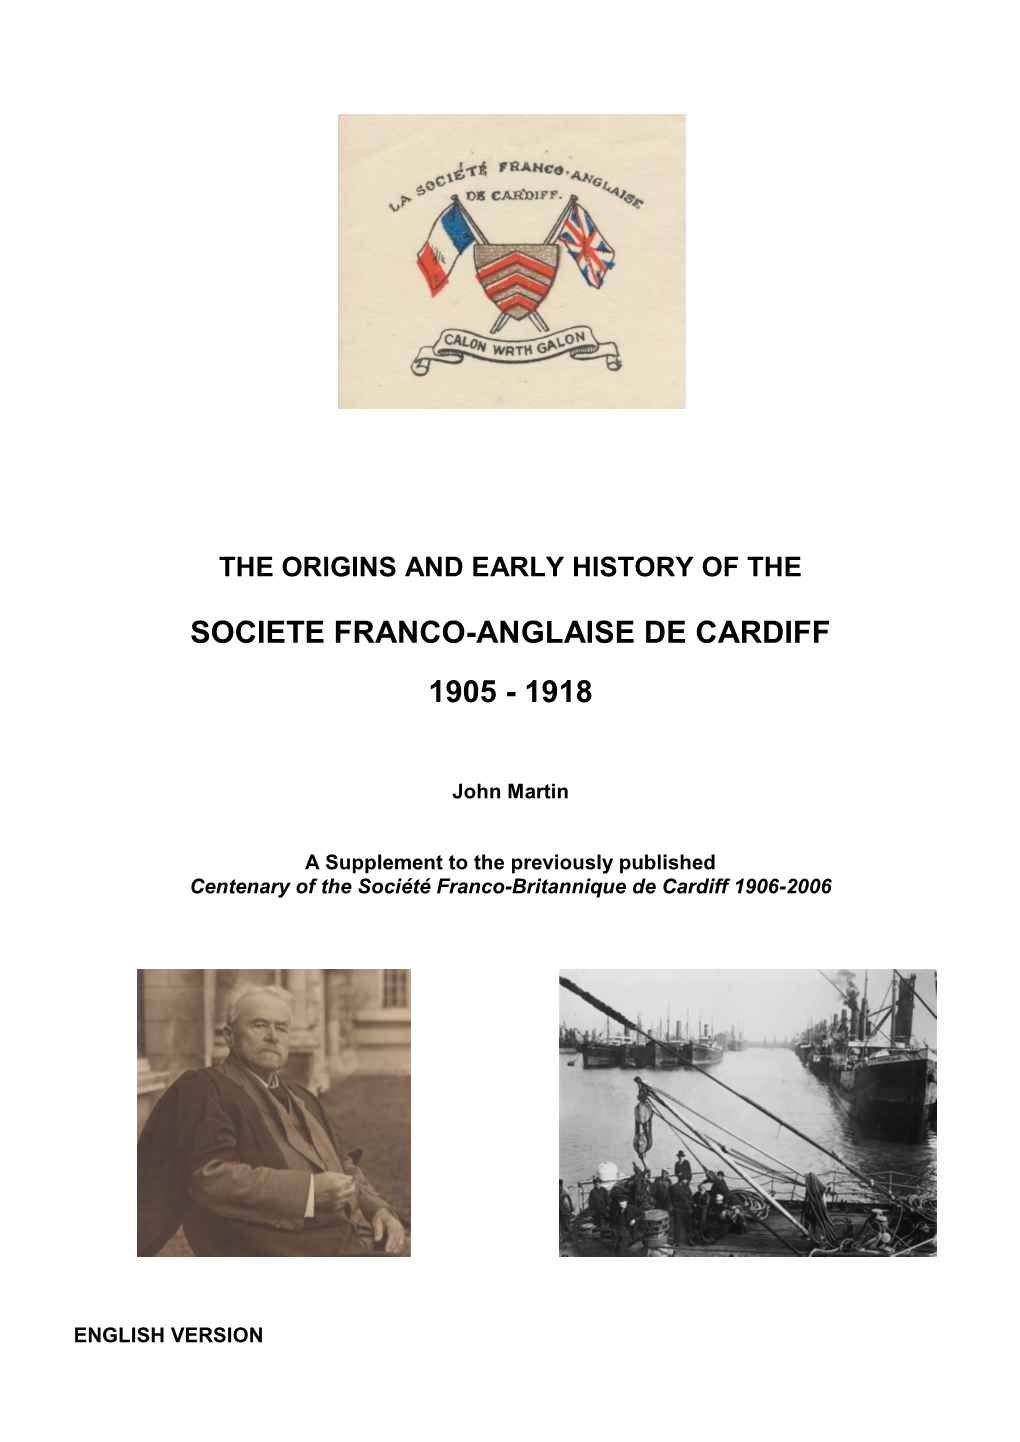 History of the Société Franco-Anglaise De Cardiff Part 1: the Launch and Early Years of the Society